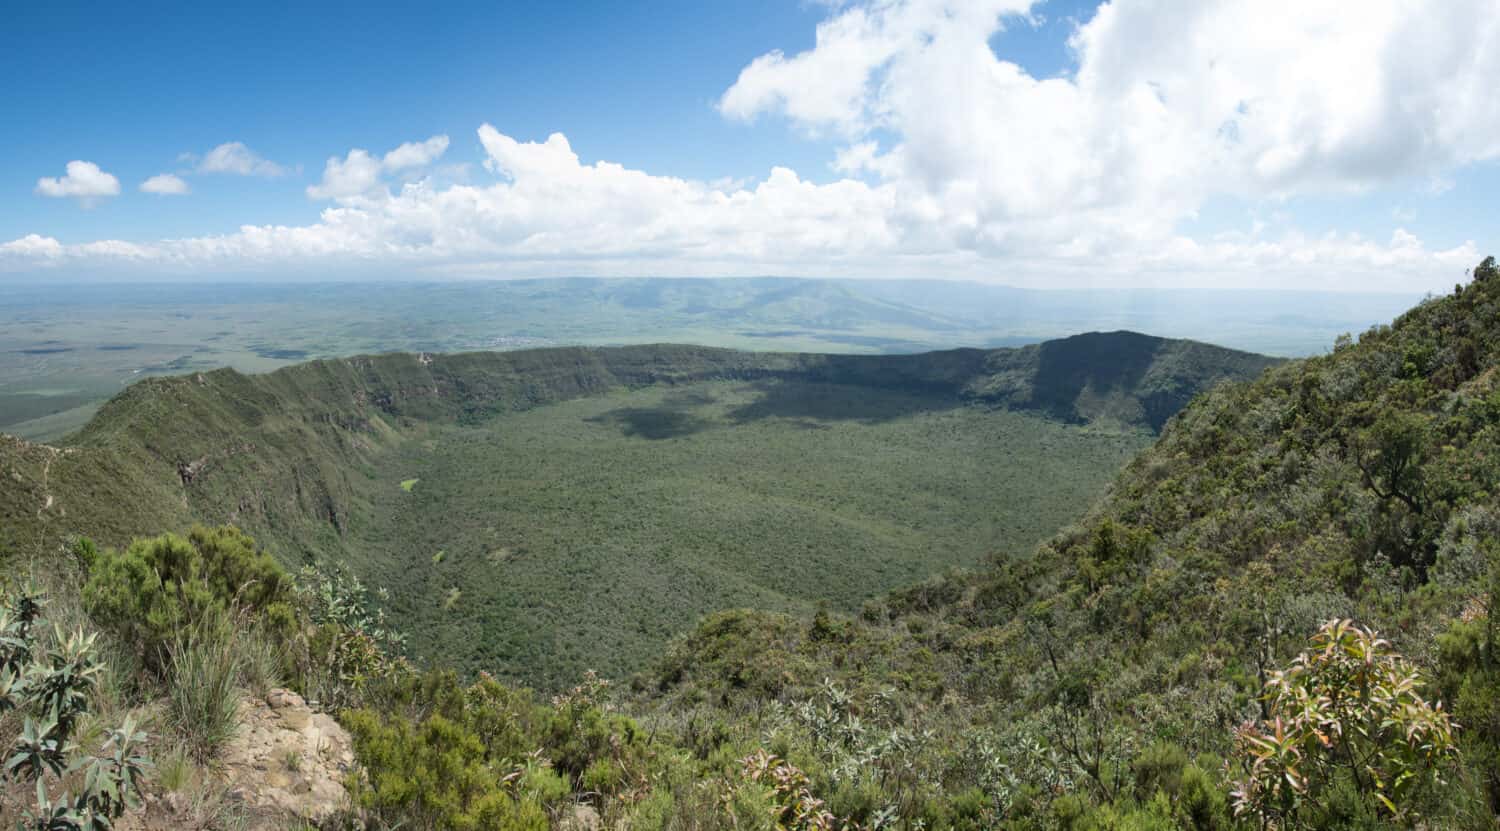 On the rim of the caldera on the Longonot volcano, rift valley, Mount Longonot National Park, Kenya.